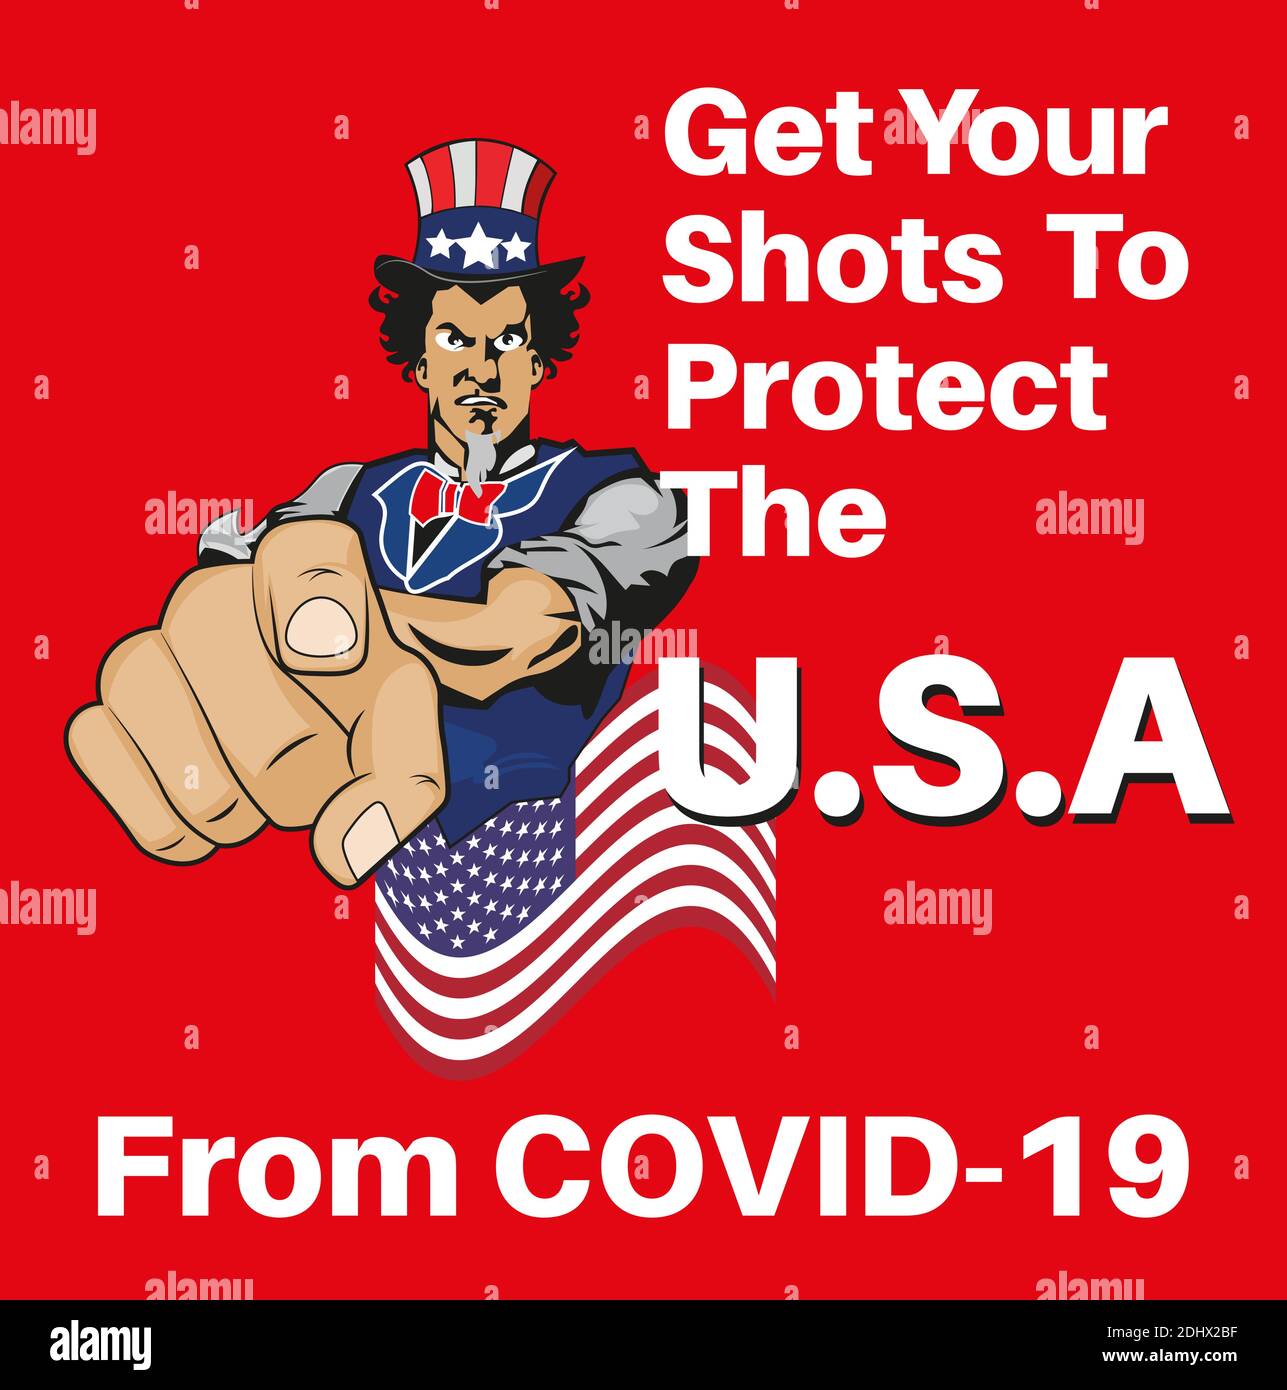 Get your Covid shots to protect the USA from COVID-19  Vector illustration Stock Vector